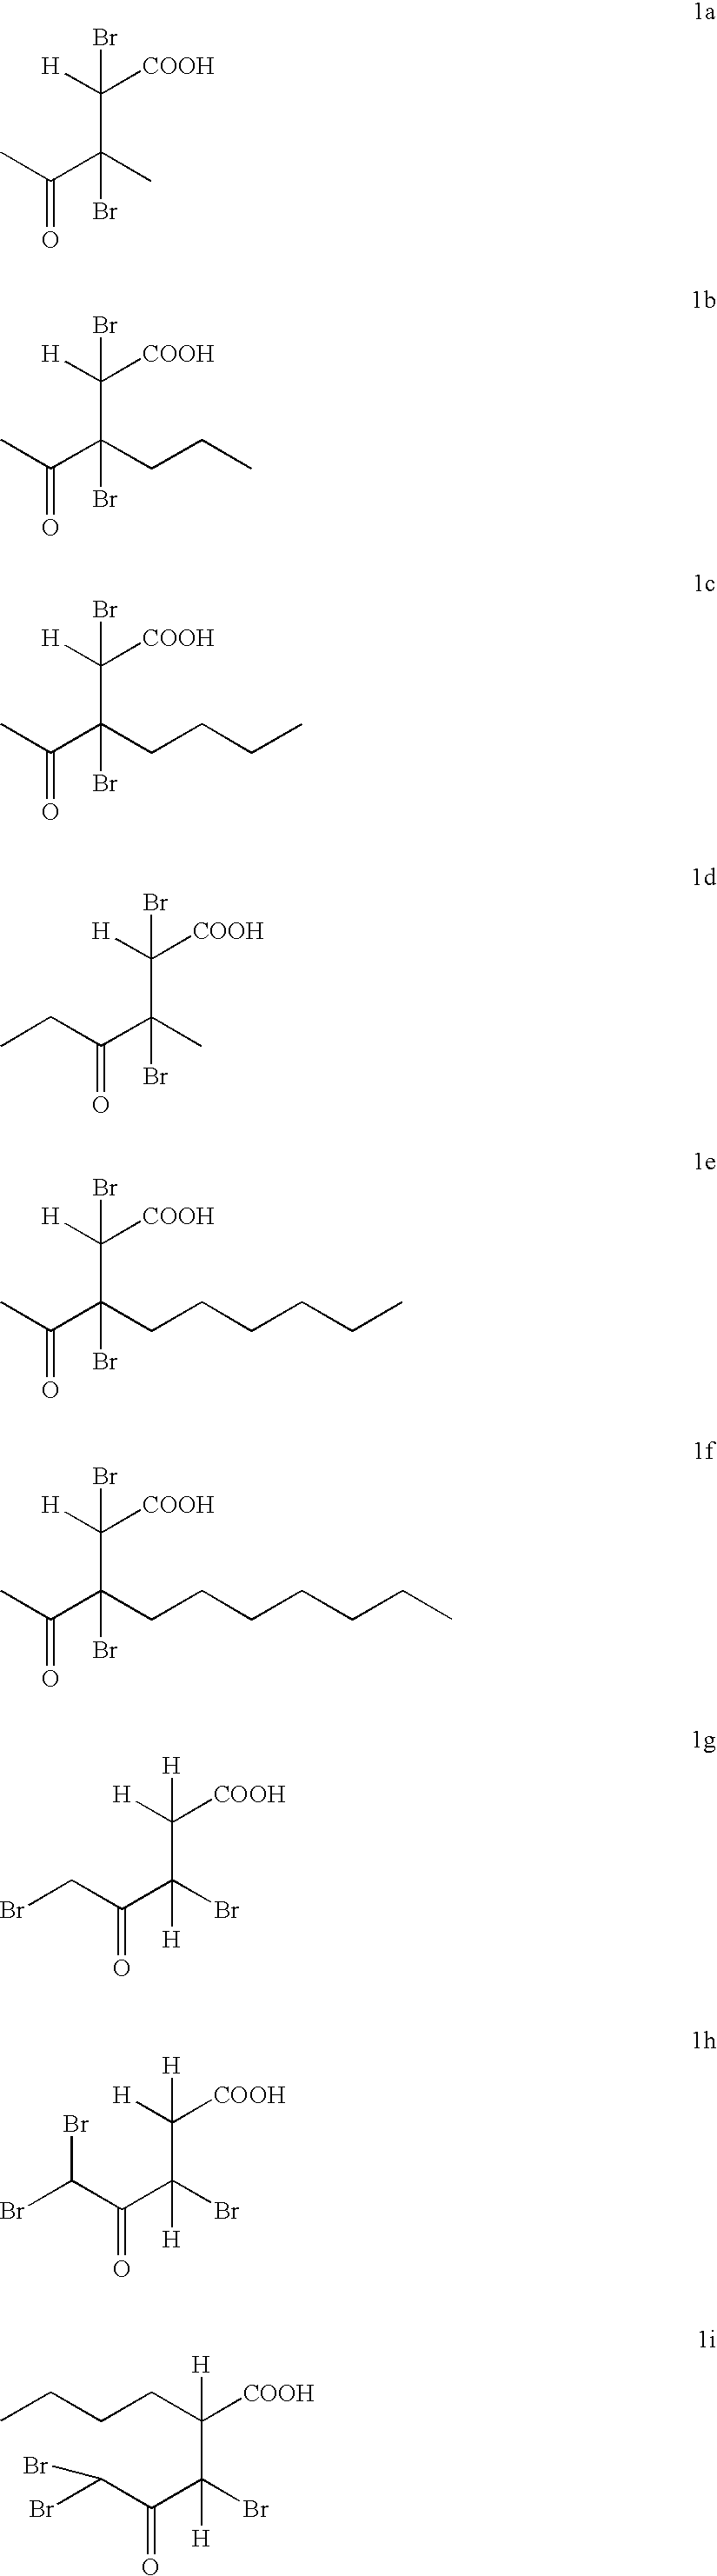 Synthesis of cyclic compounds